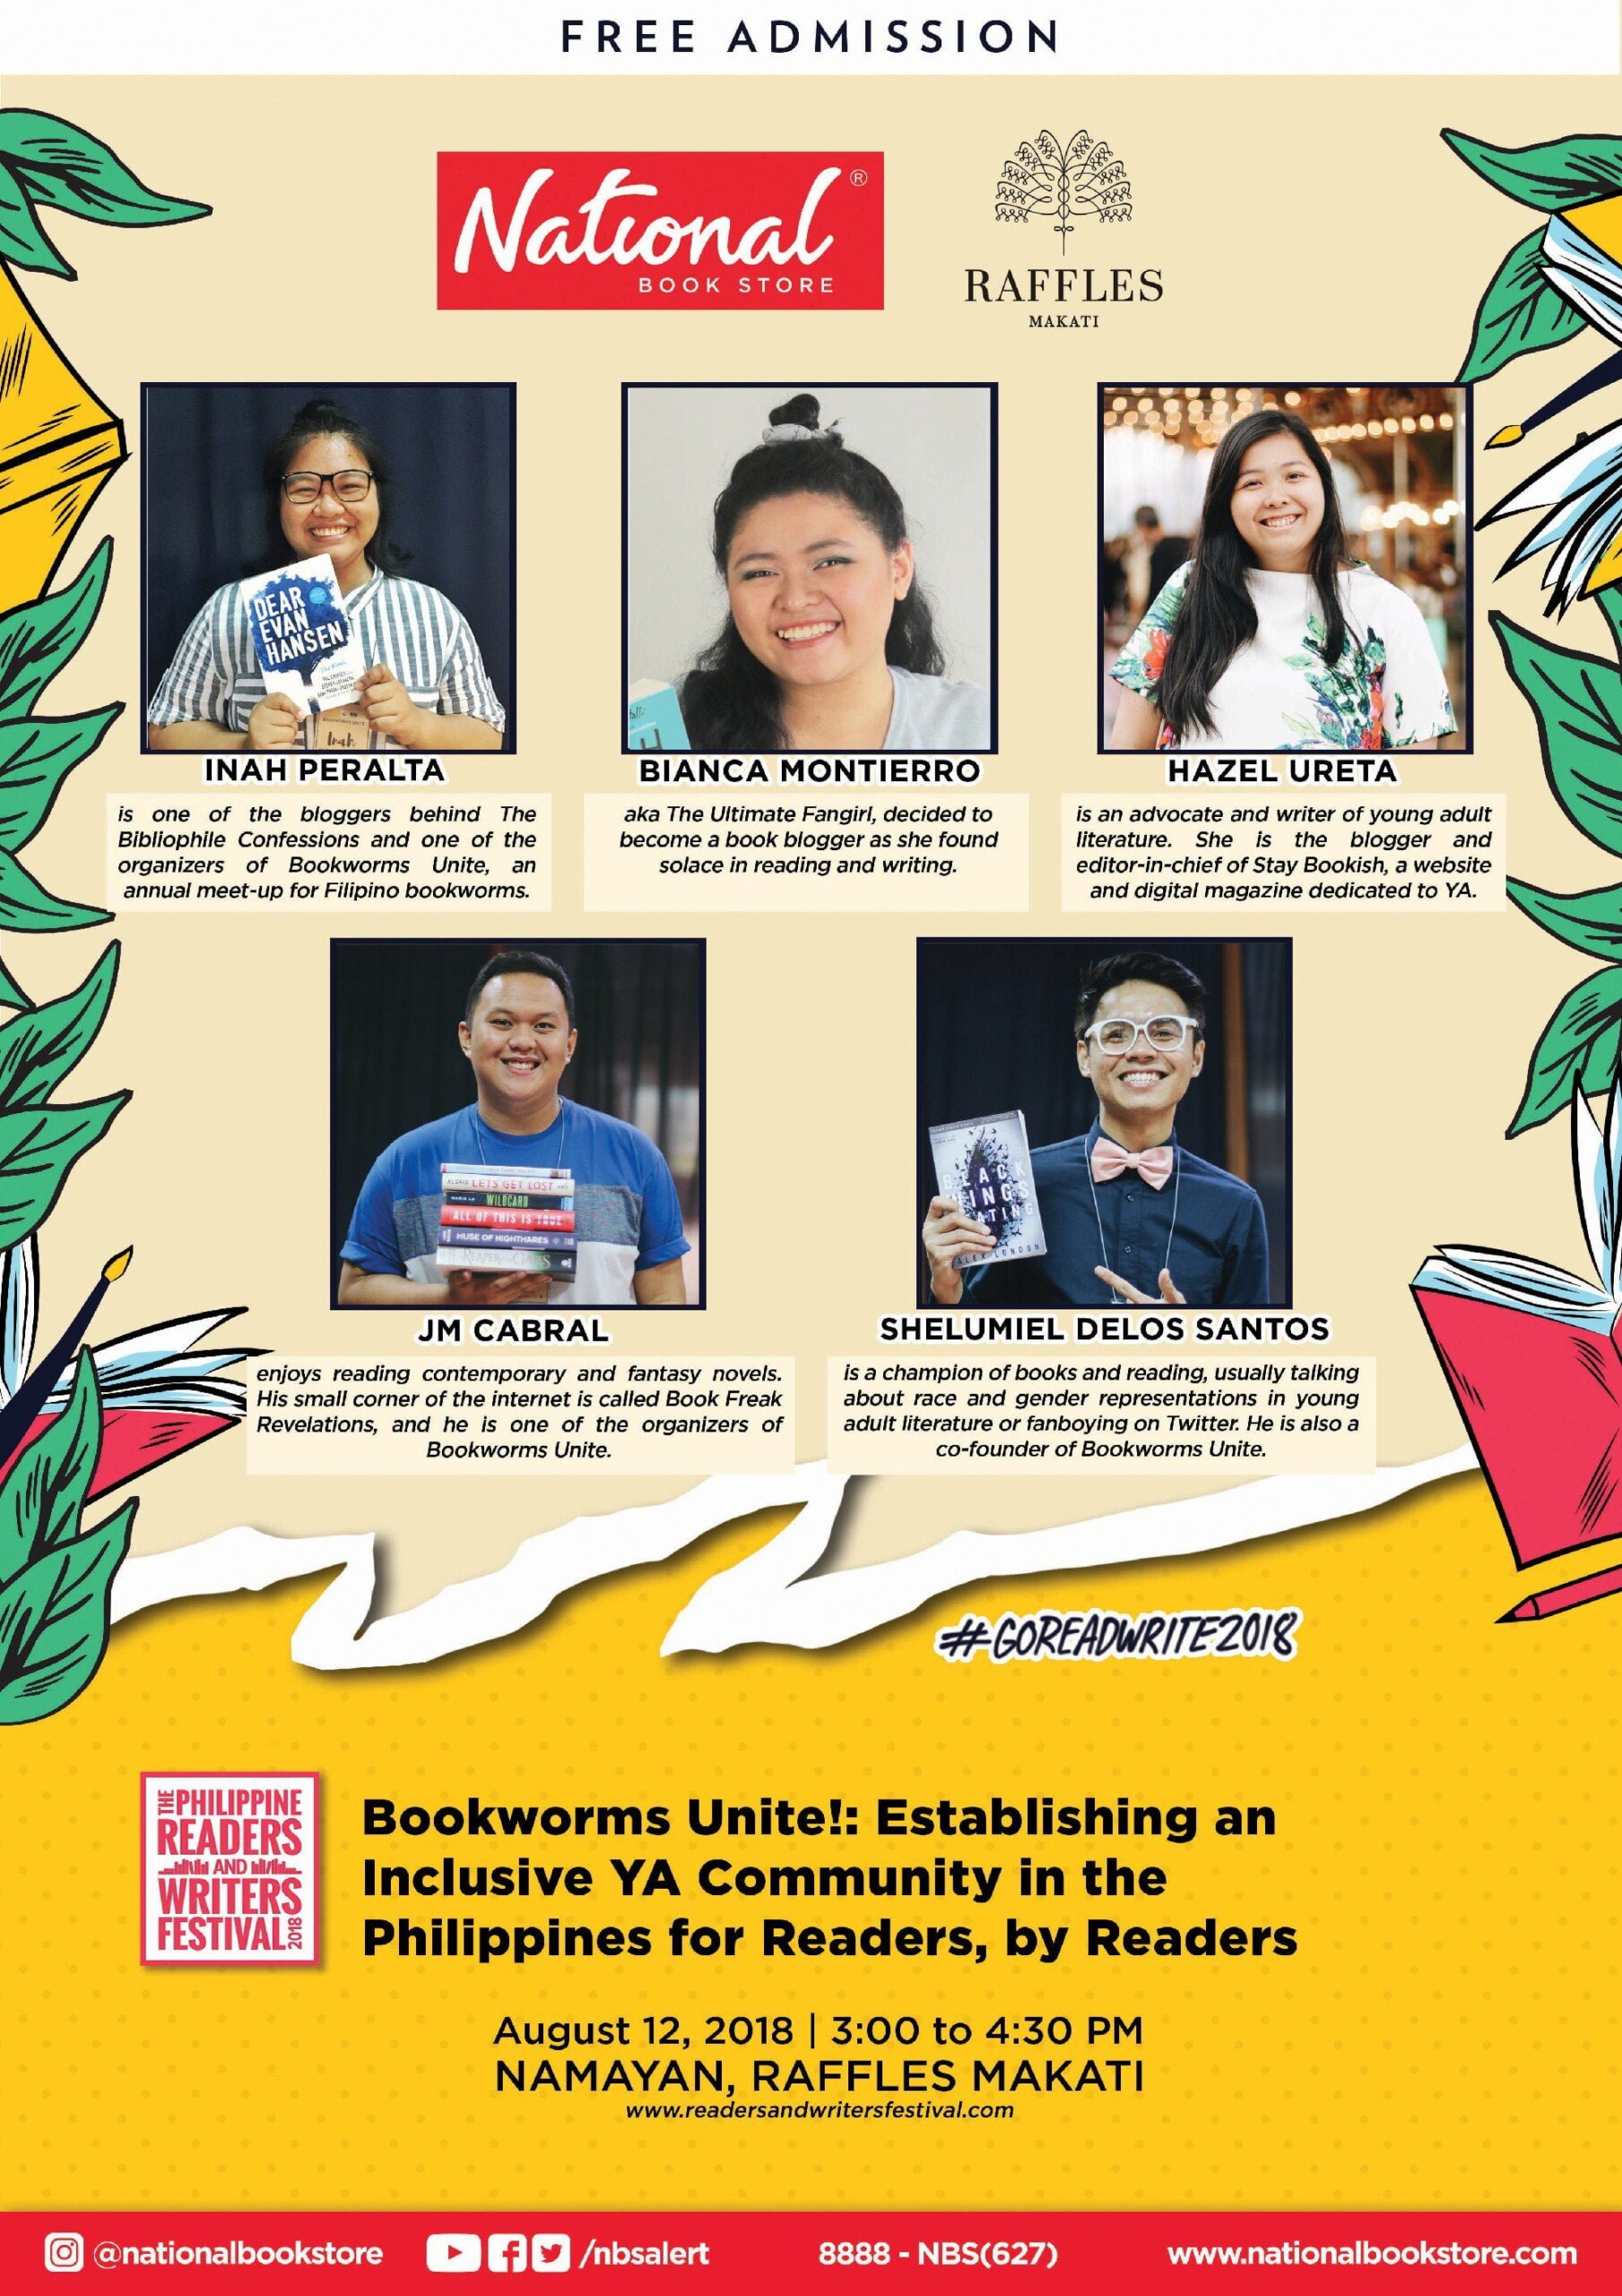 philippine readers and writers festival 2018